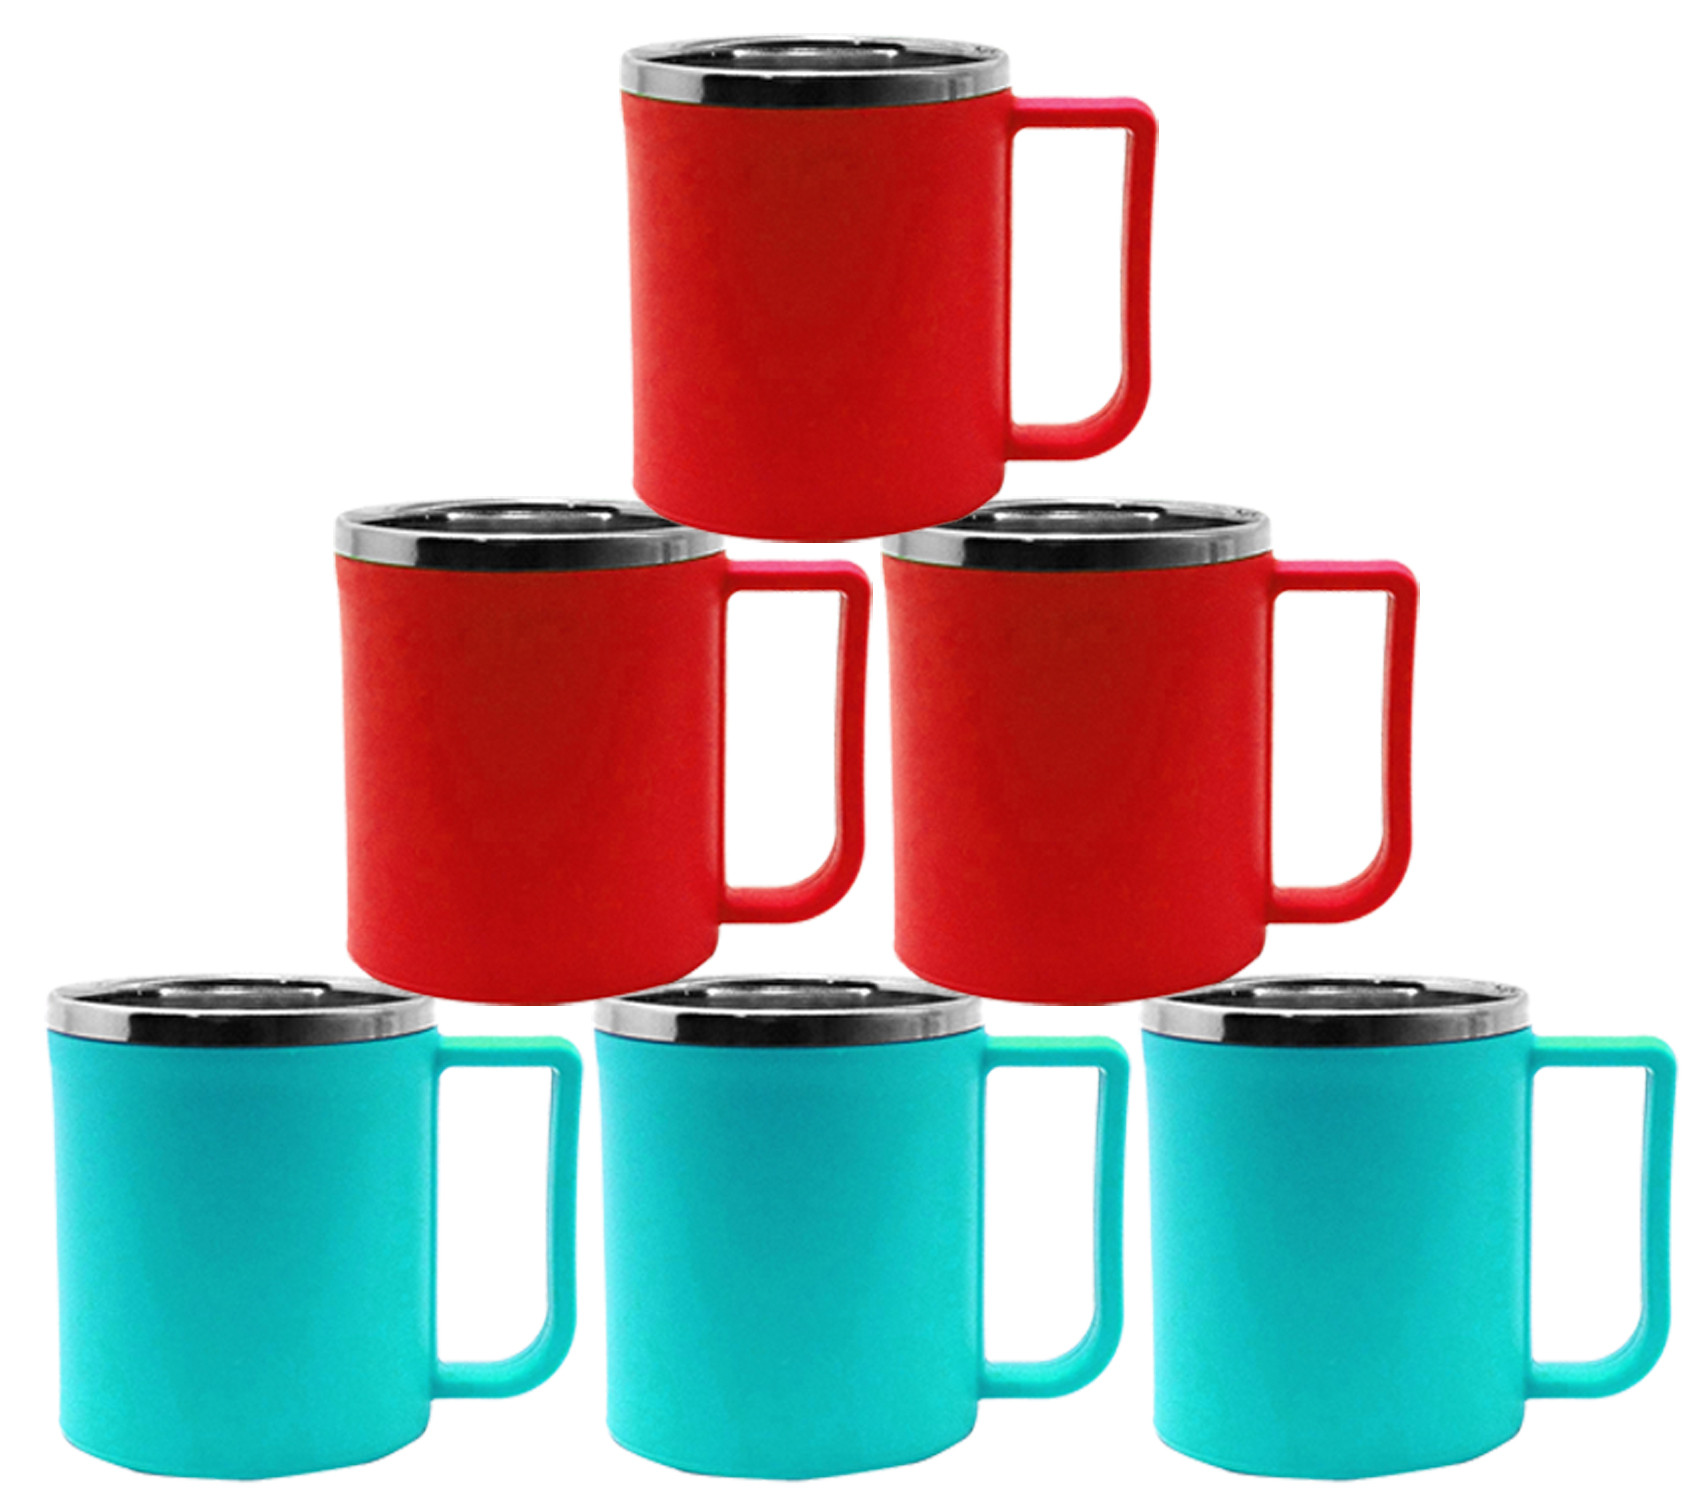 Kuber Industries Plastic Steel Cups for Coffee Tea Cocoa, Camping Mugs with Handle, Portable & Easy Clean,(Green & Red)